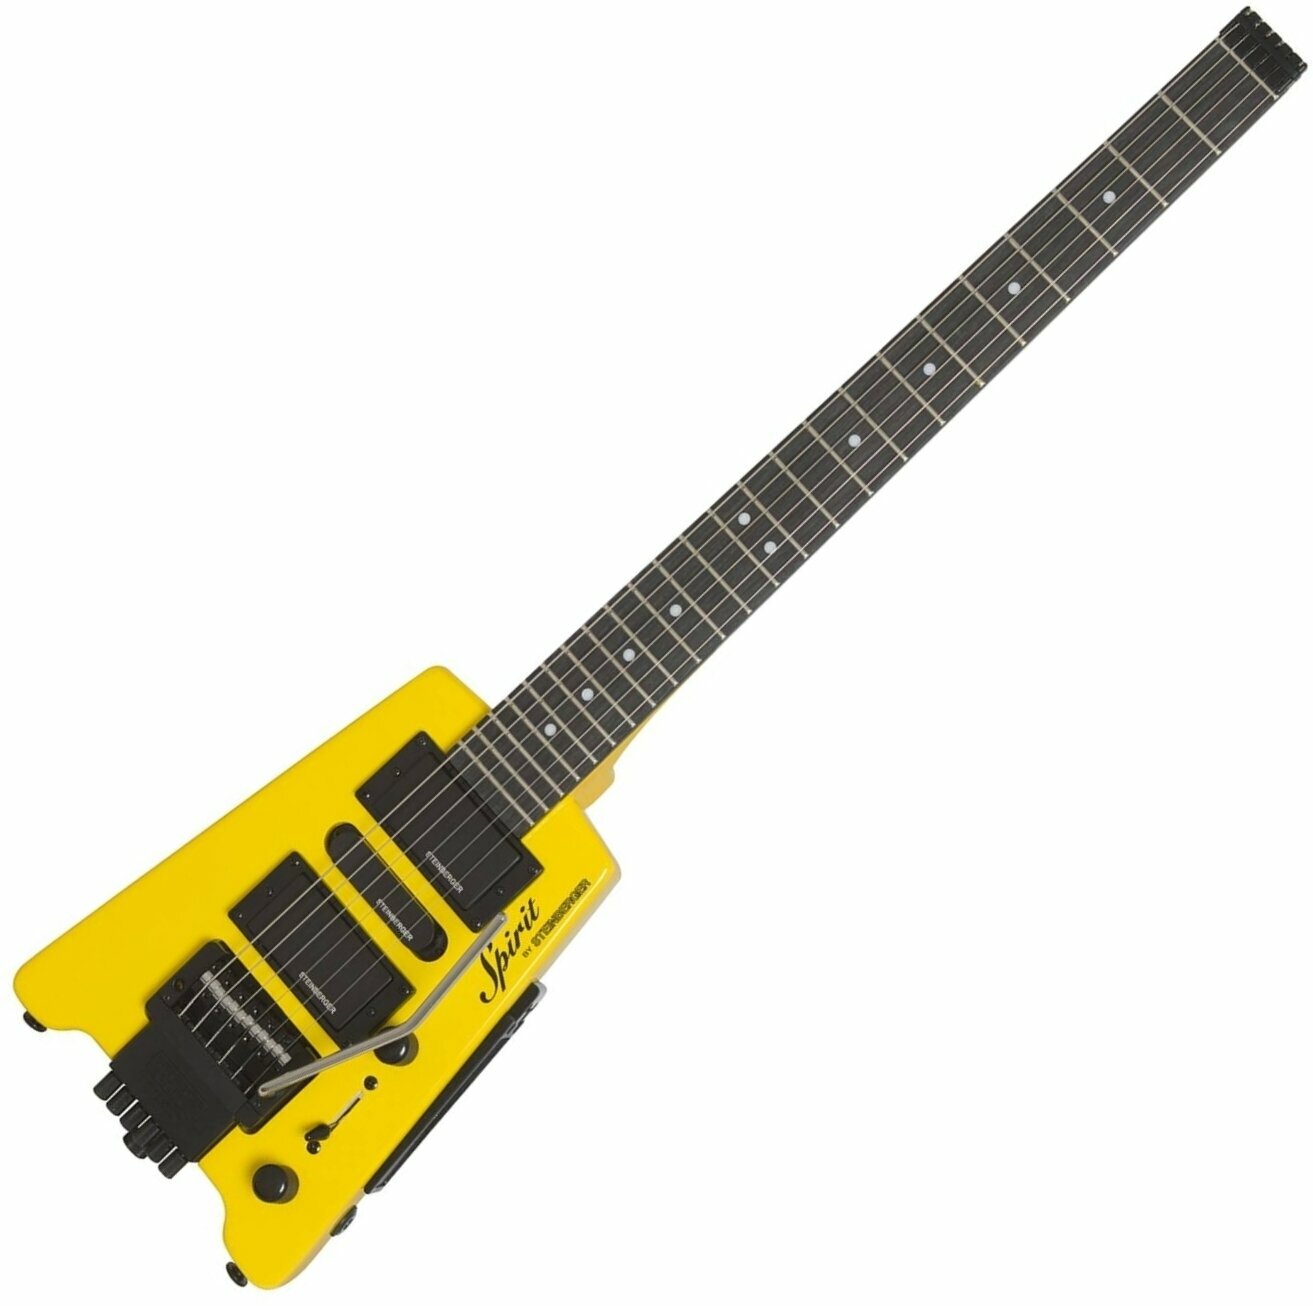 Headless guitar Steinberger Spirit Gt-Pro Deluxe Outfit Hb-Sc-Hb Hot Rod Yellow